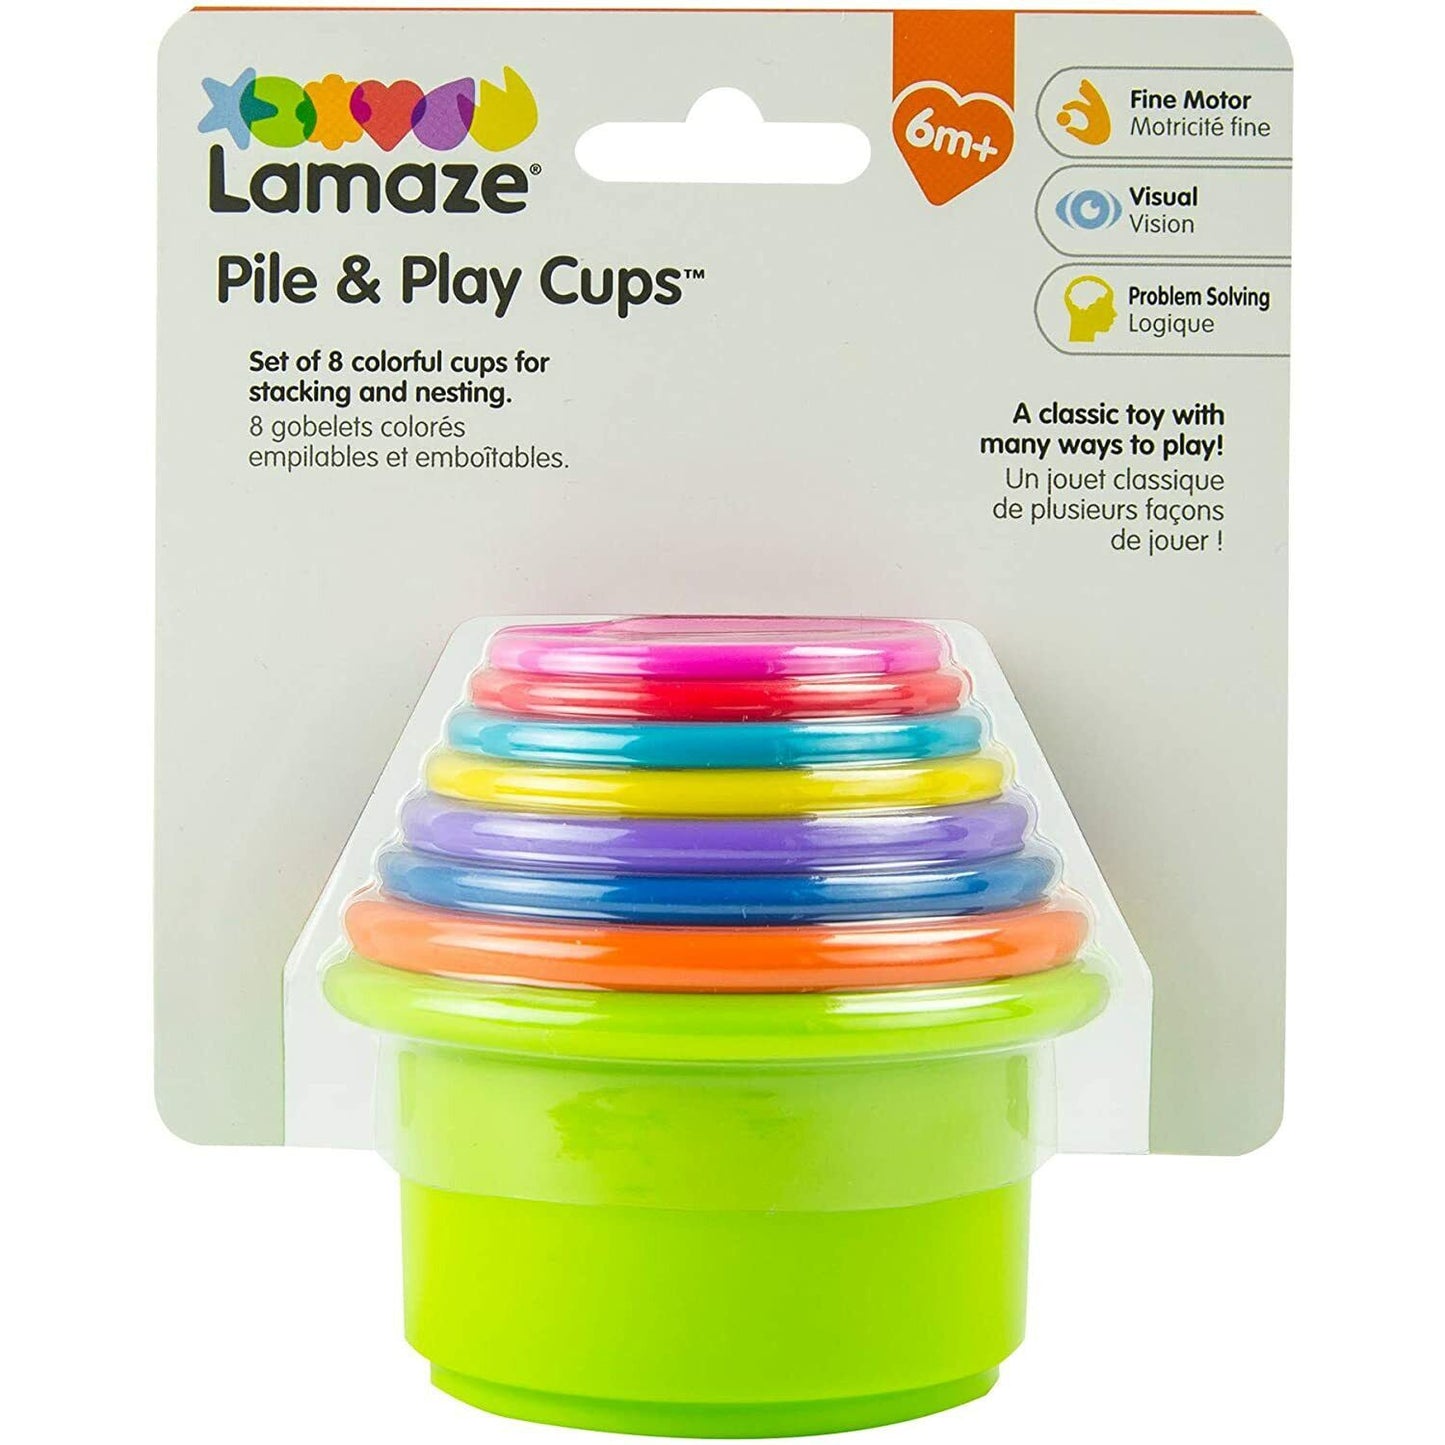 Lamaze Pile & Play Cups Baby & Toddler Sensory Learn Through Play Tactile Toy